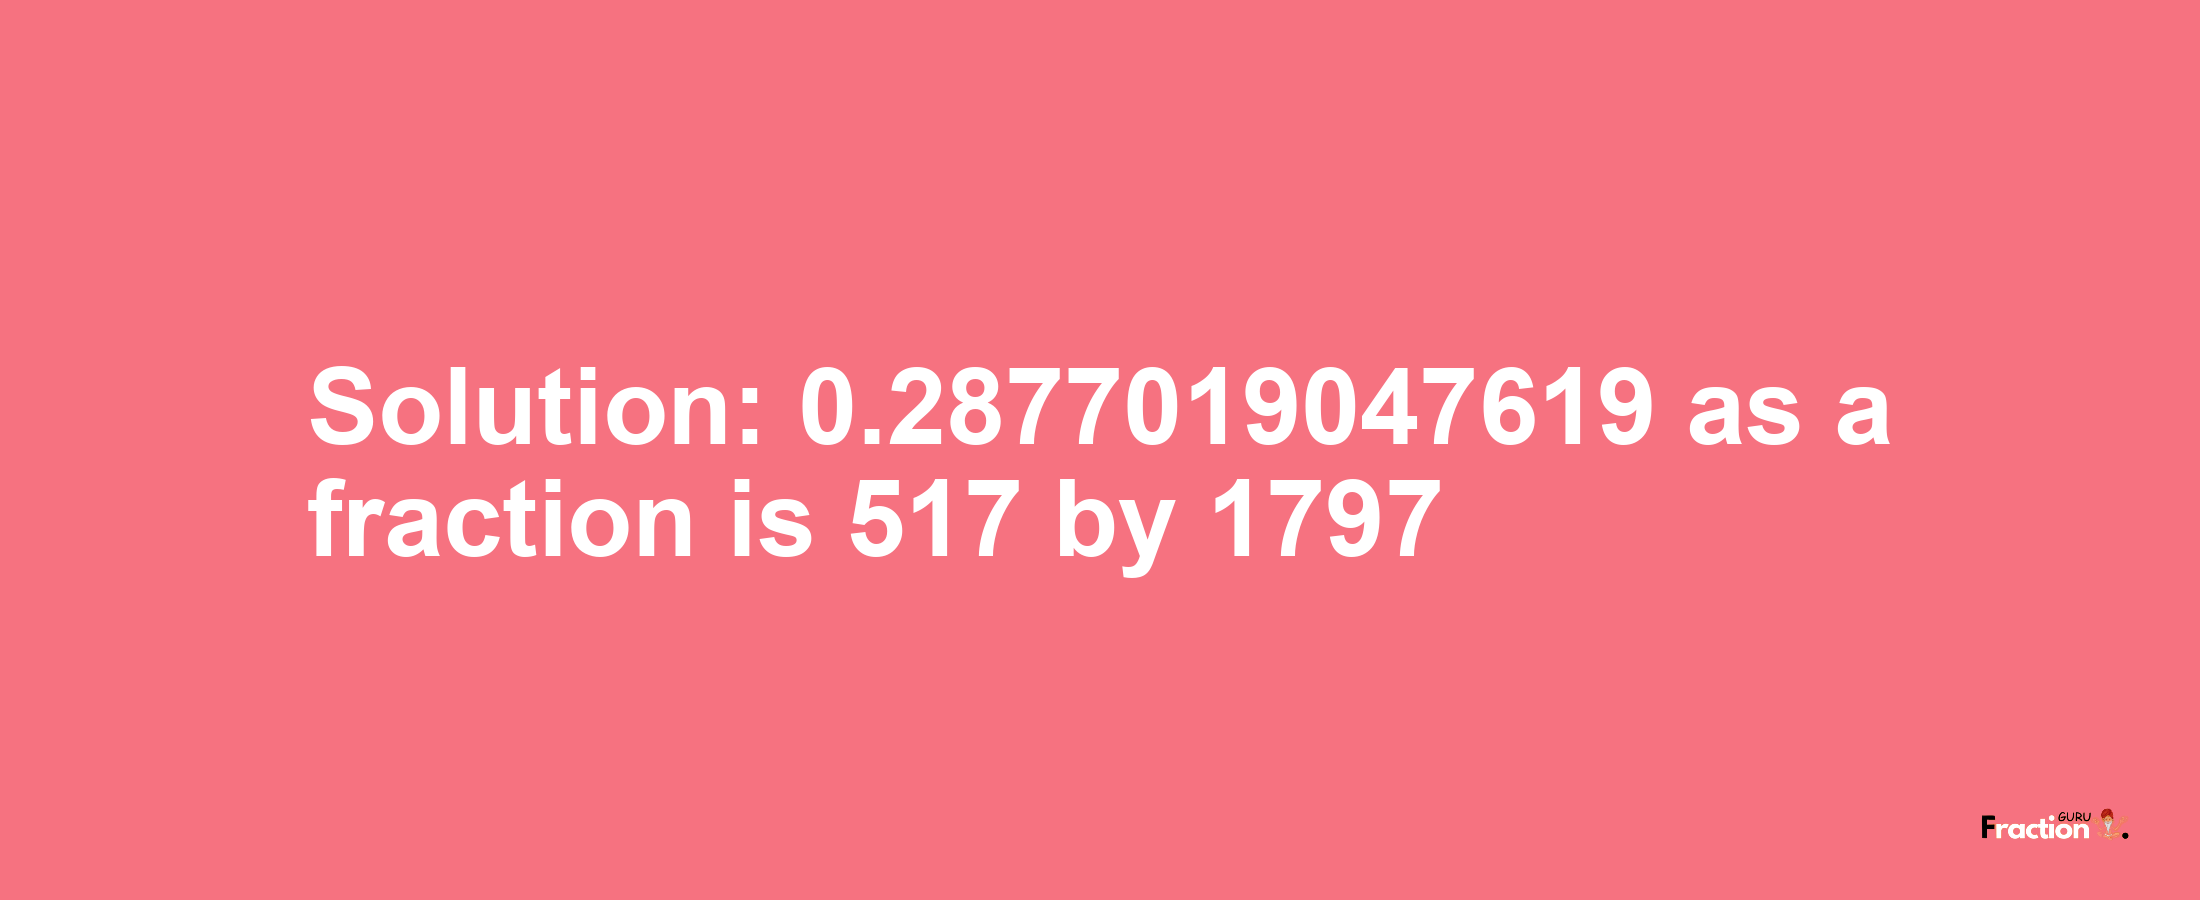 Solution:0.2877019047619 as a fraction is 517/1797